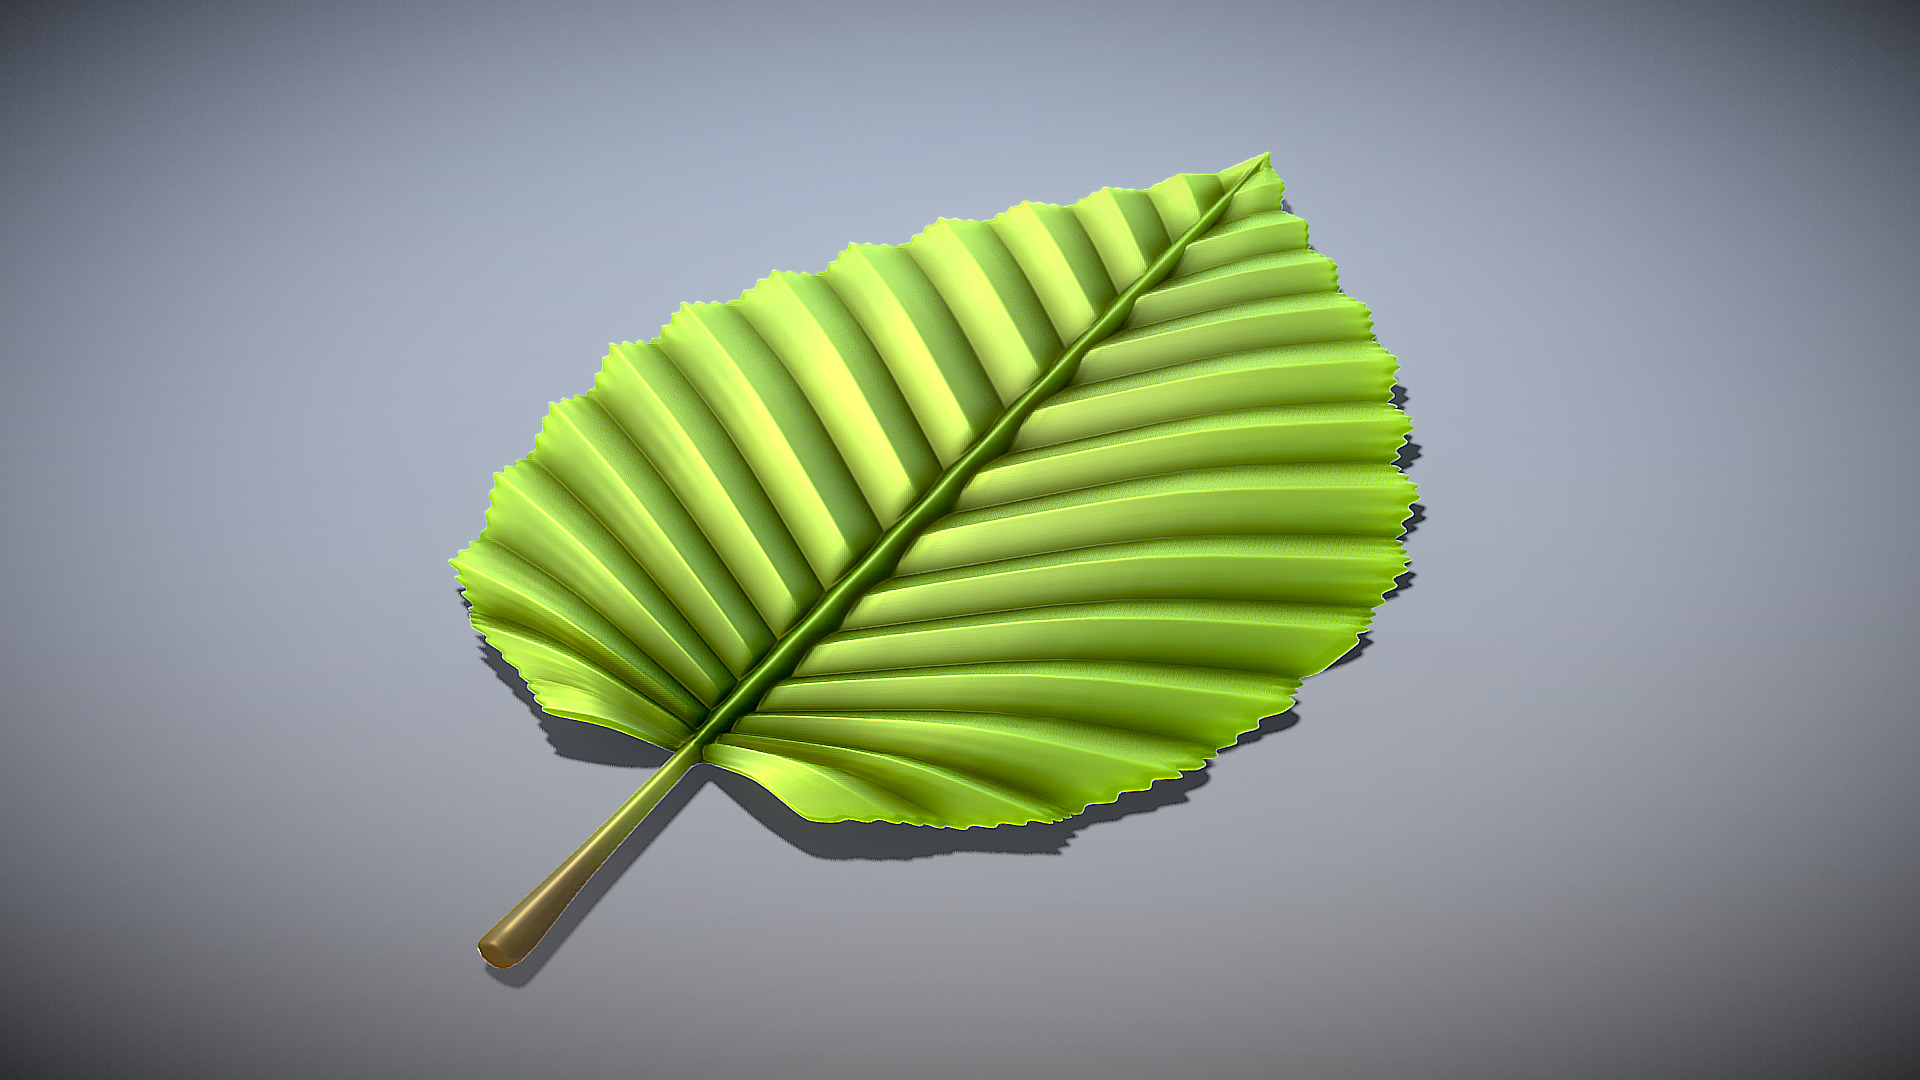 3D model Hornbeam Leaf (High-Poly) - This is a 3D model of the Hornbeam Leaf (High-Poly). The 3D model is about a green leaf on a white background.